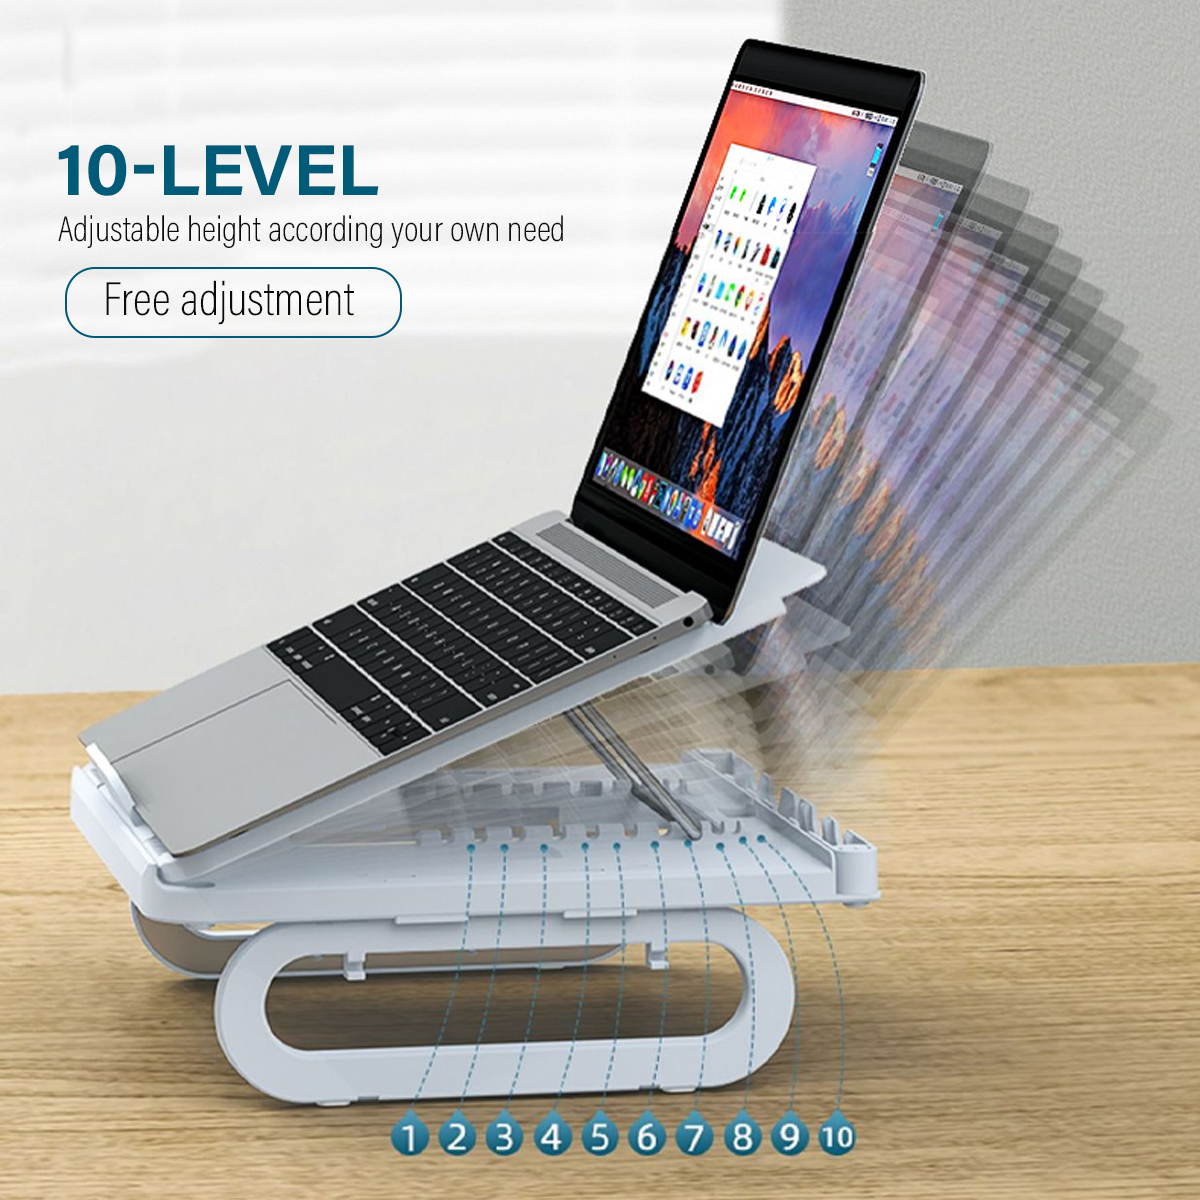 Universal-Multifunctional-with-4USB-30-Ports-10-Gear-Height-Adjustment-Heat-Dissipation-Macbook-Desk-1881128-2